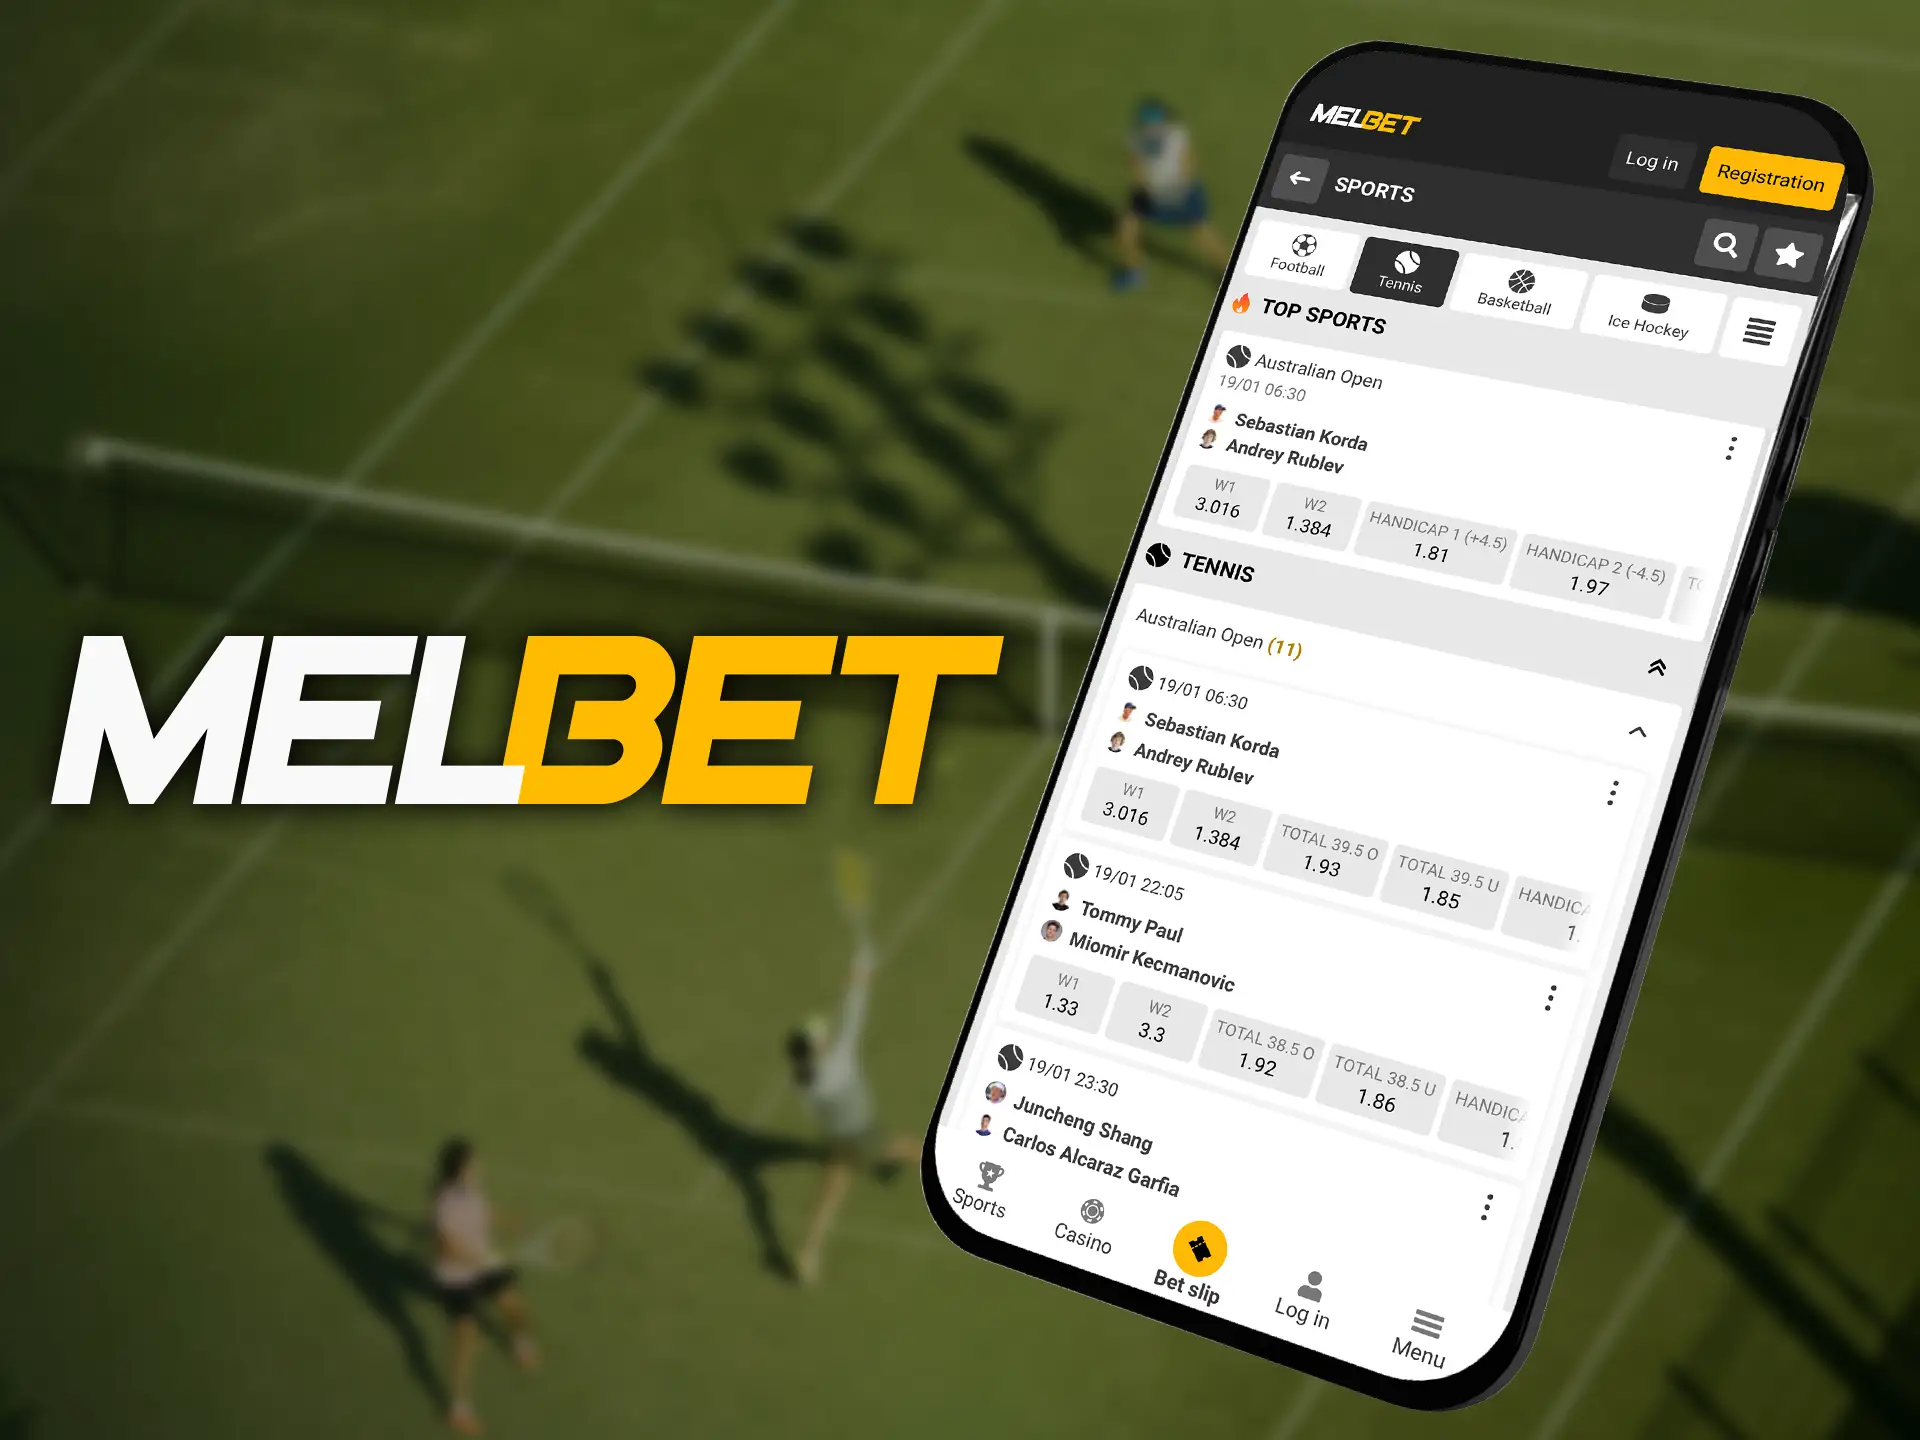 The Melbet app offers various types of tennis betting.